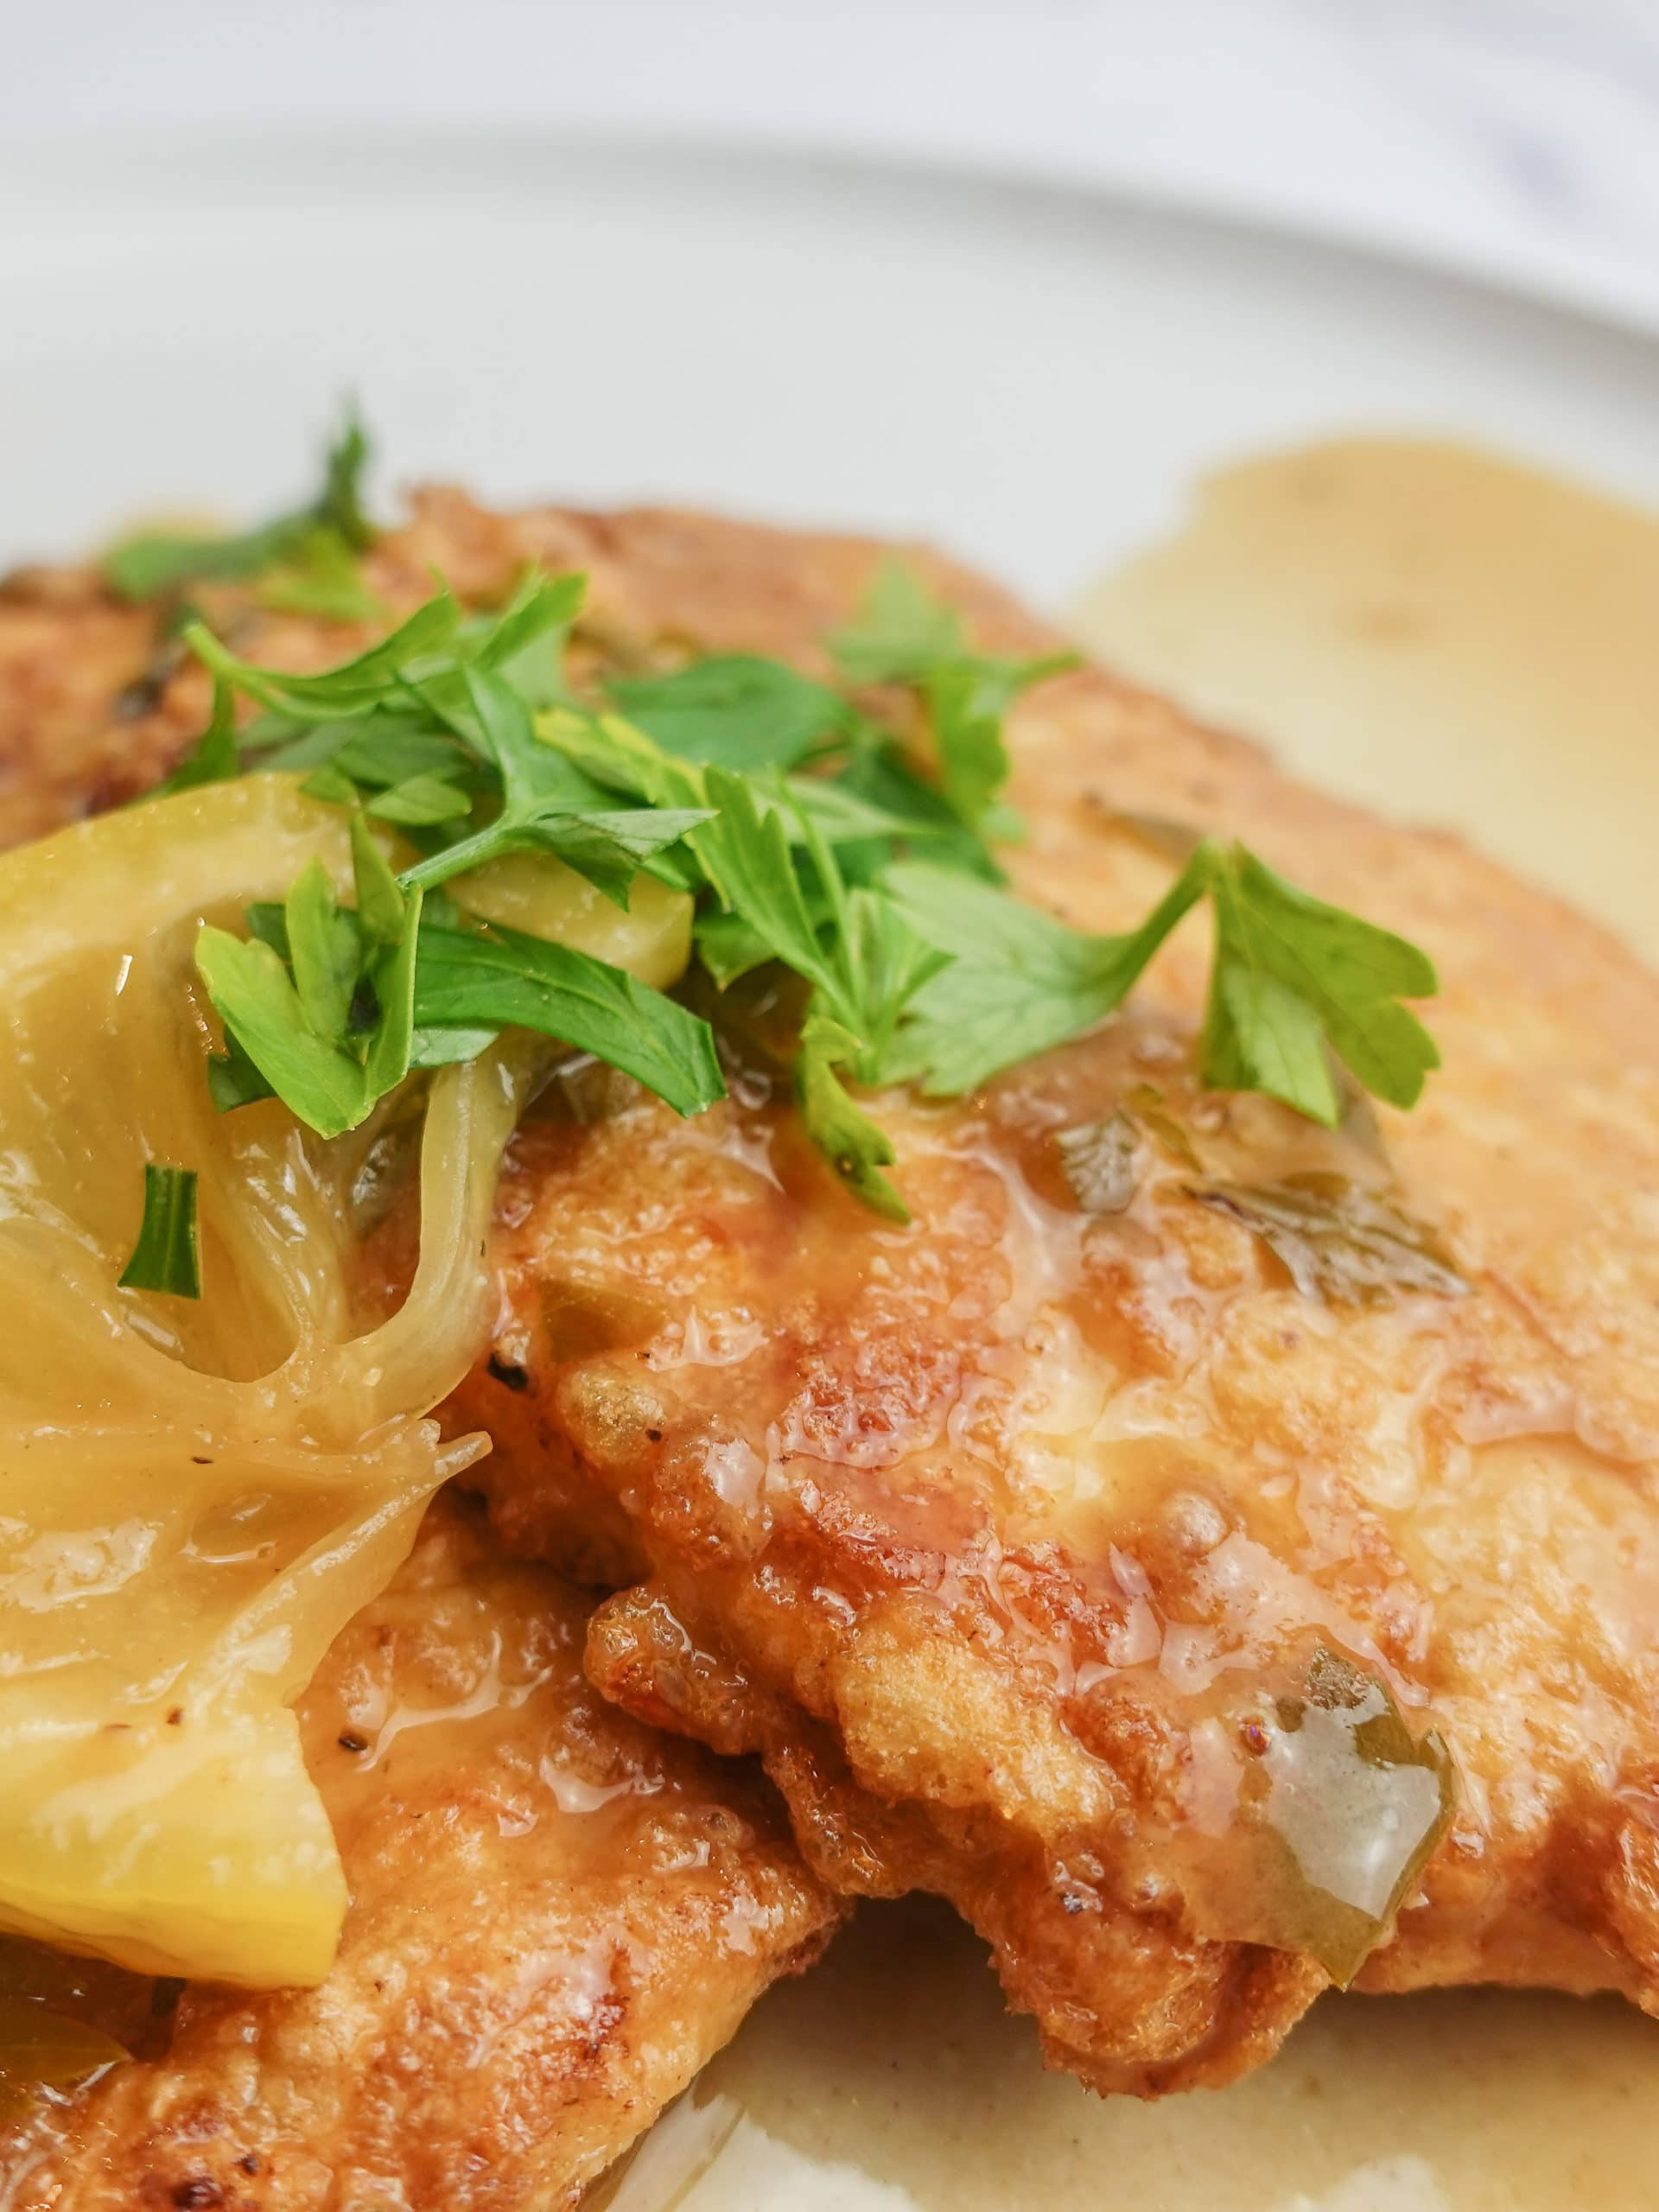 Chicken Francese on a white plate smothered in a thick Chicken Francese sauce with slices of lemon and garnished with chopped fresh Italian parsley.